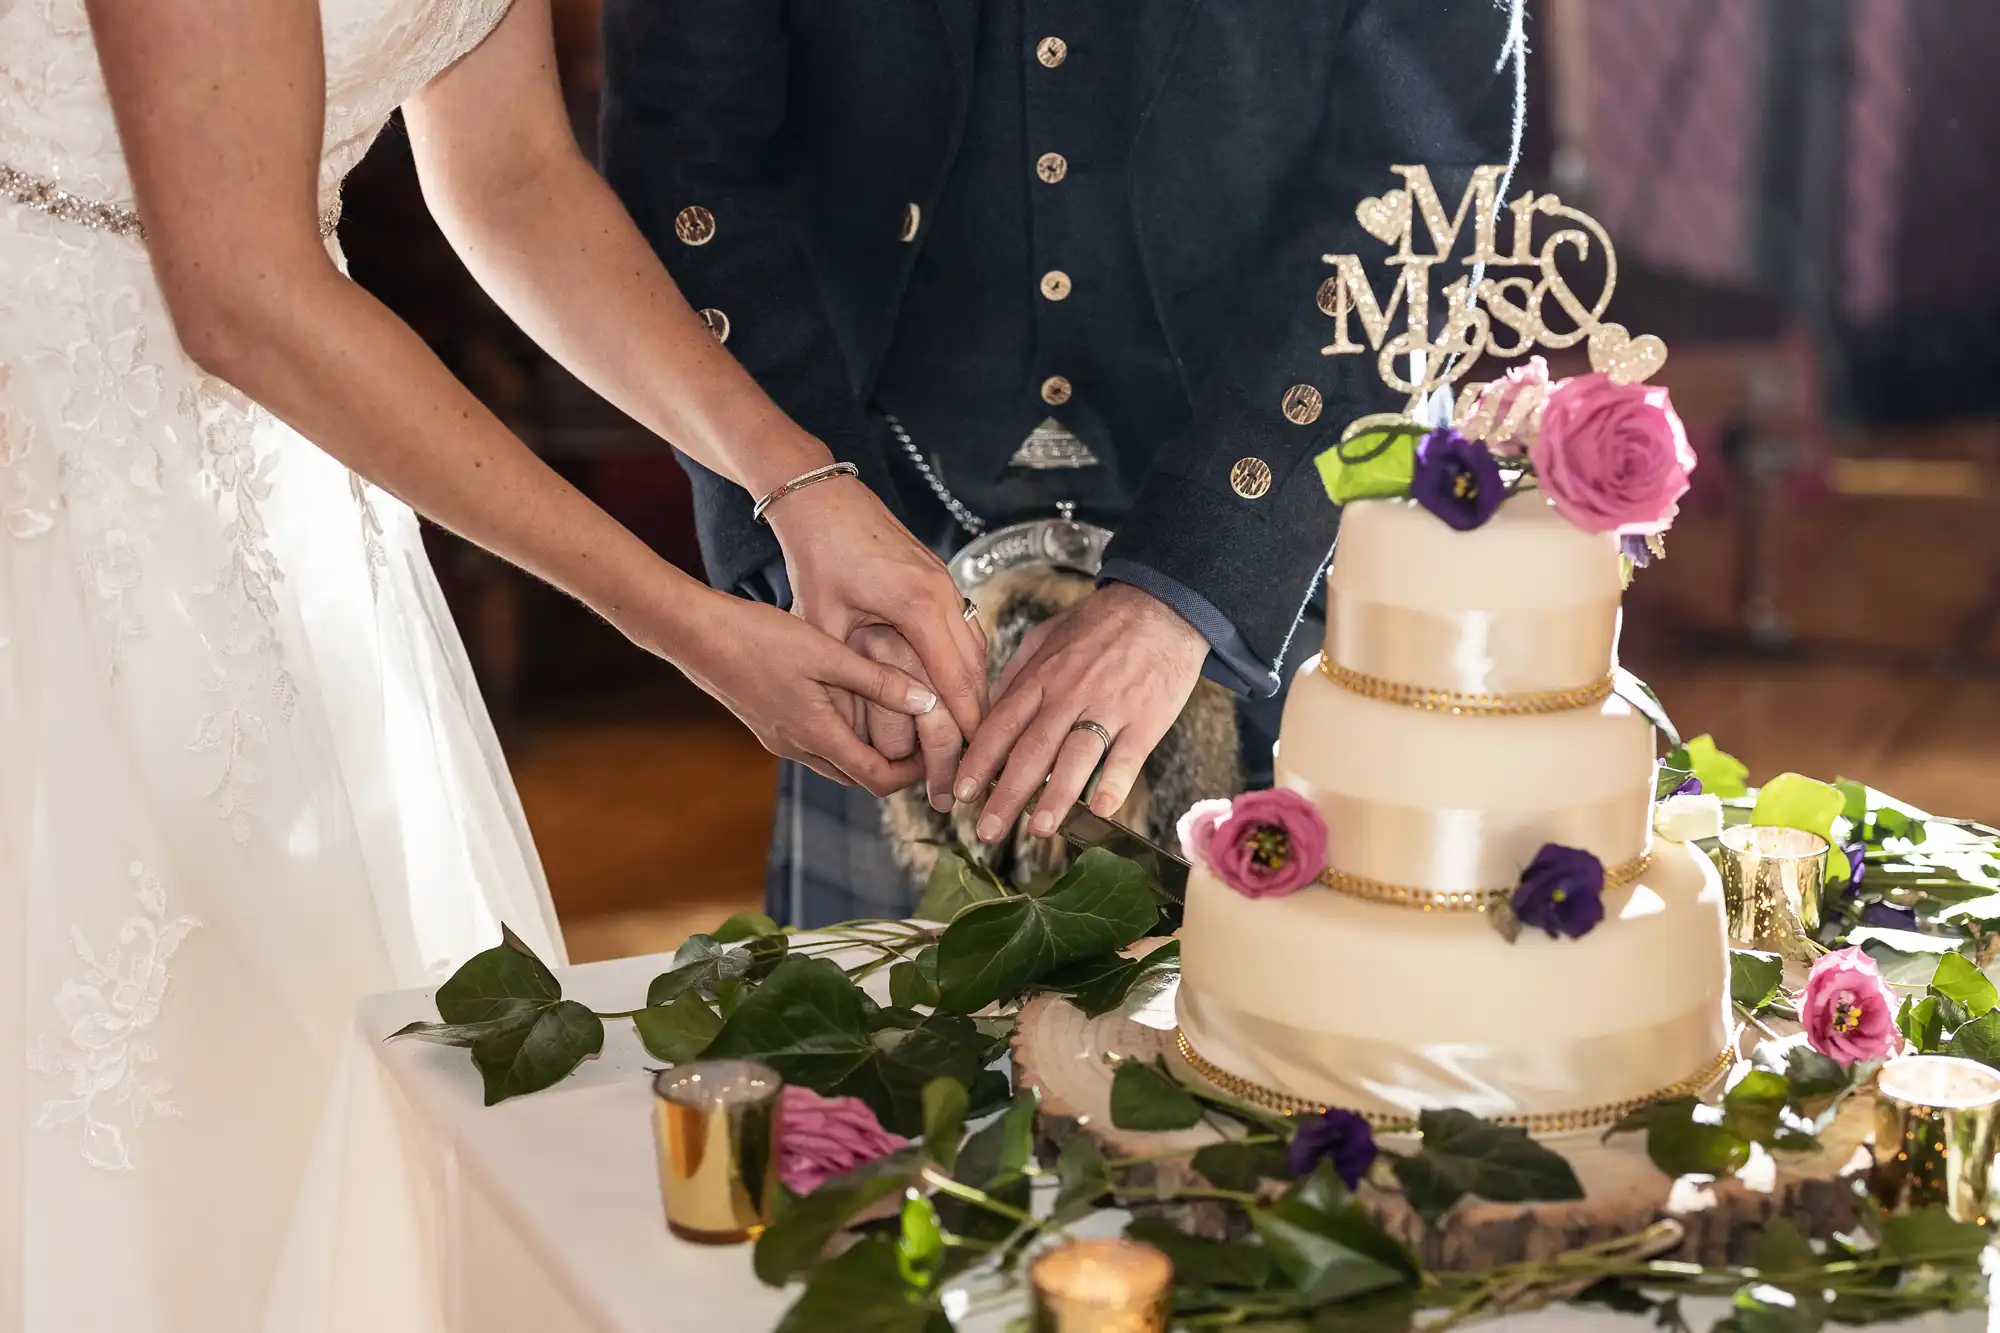 A bride and groom cut into a three-tier wedding cake adorned with flowers and a "Mr & Mrs" topper, standing on a table decorated with foliage and candles.